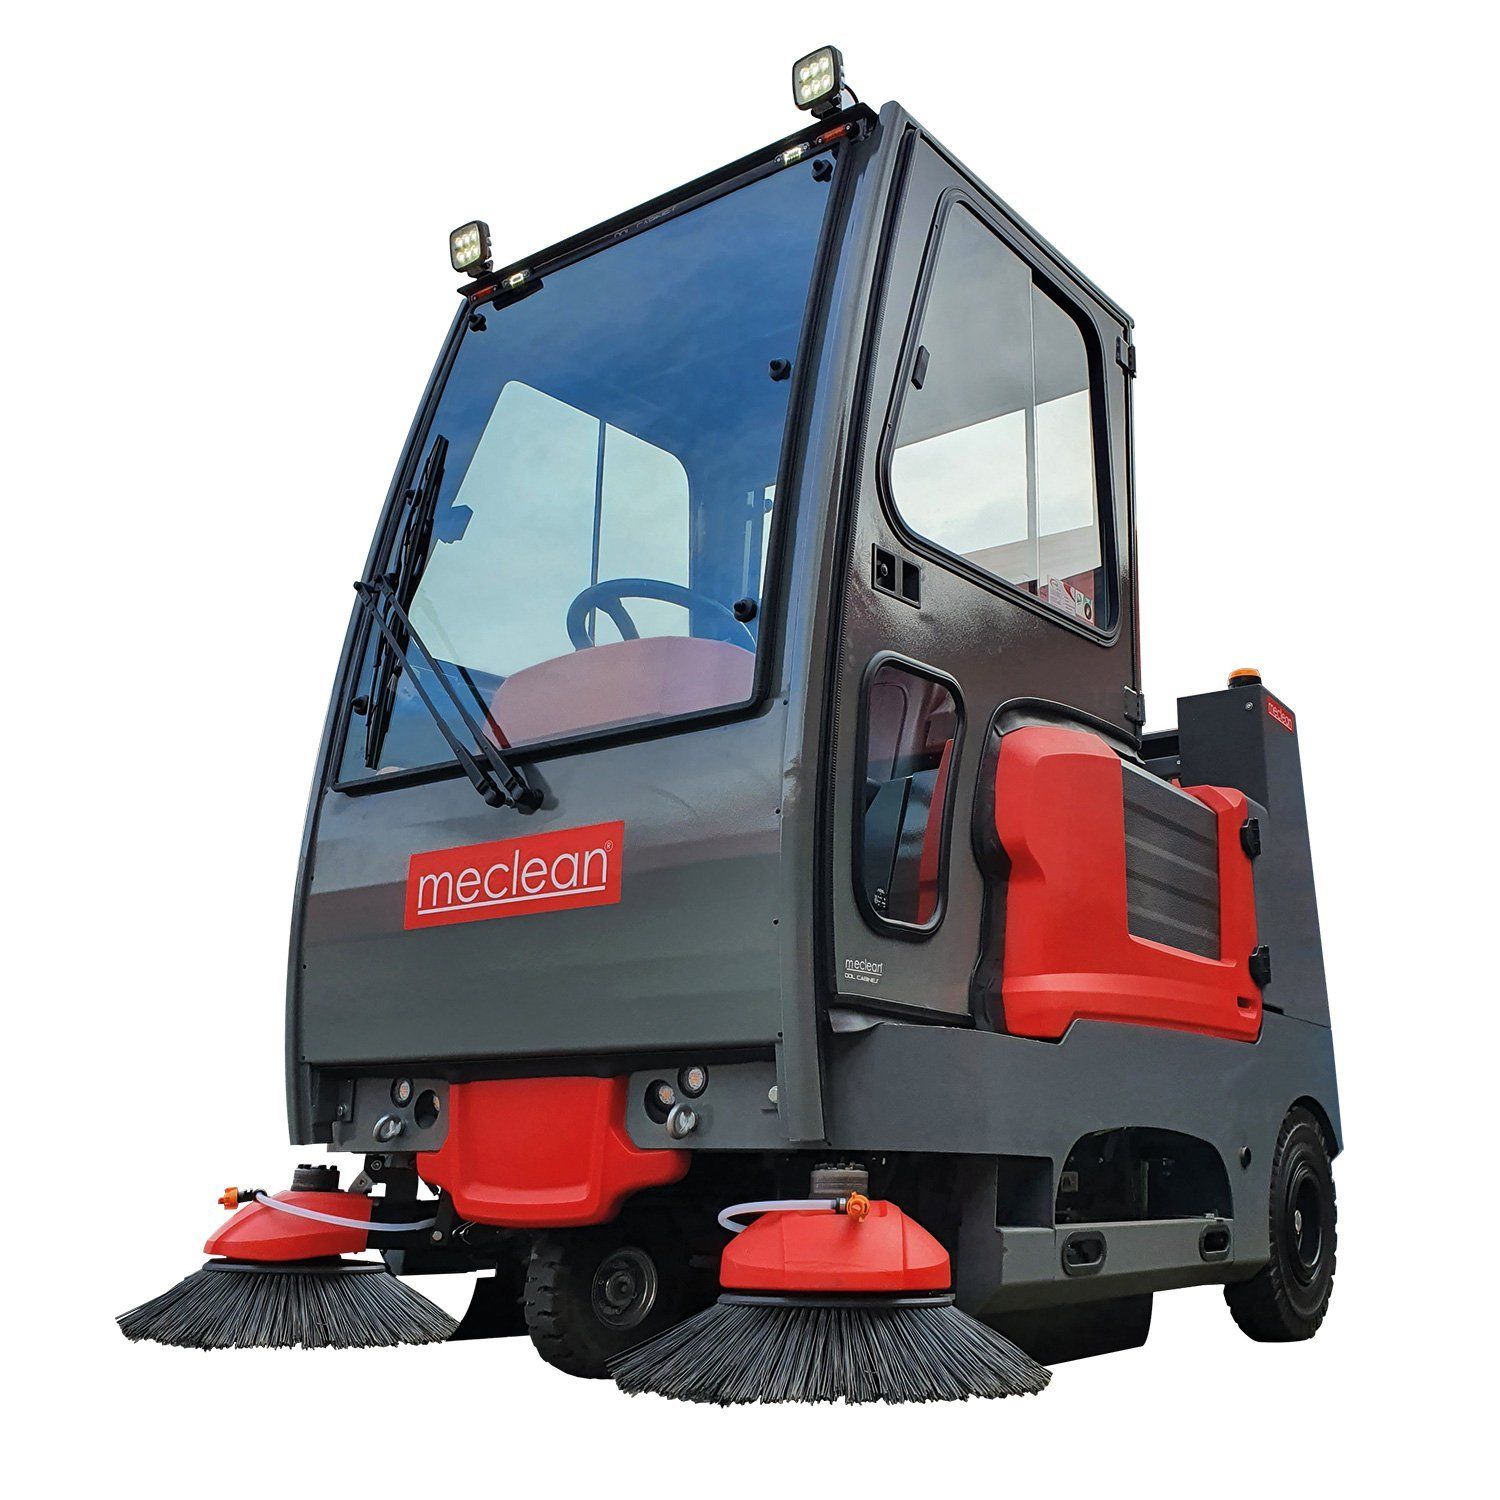 Meclean professional industrial ride-on sweeper battery powered drive BUSTER 1800TTD CAB